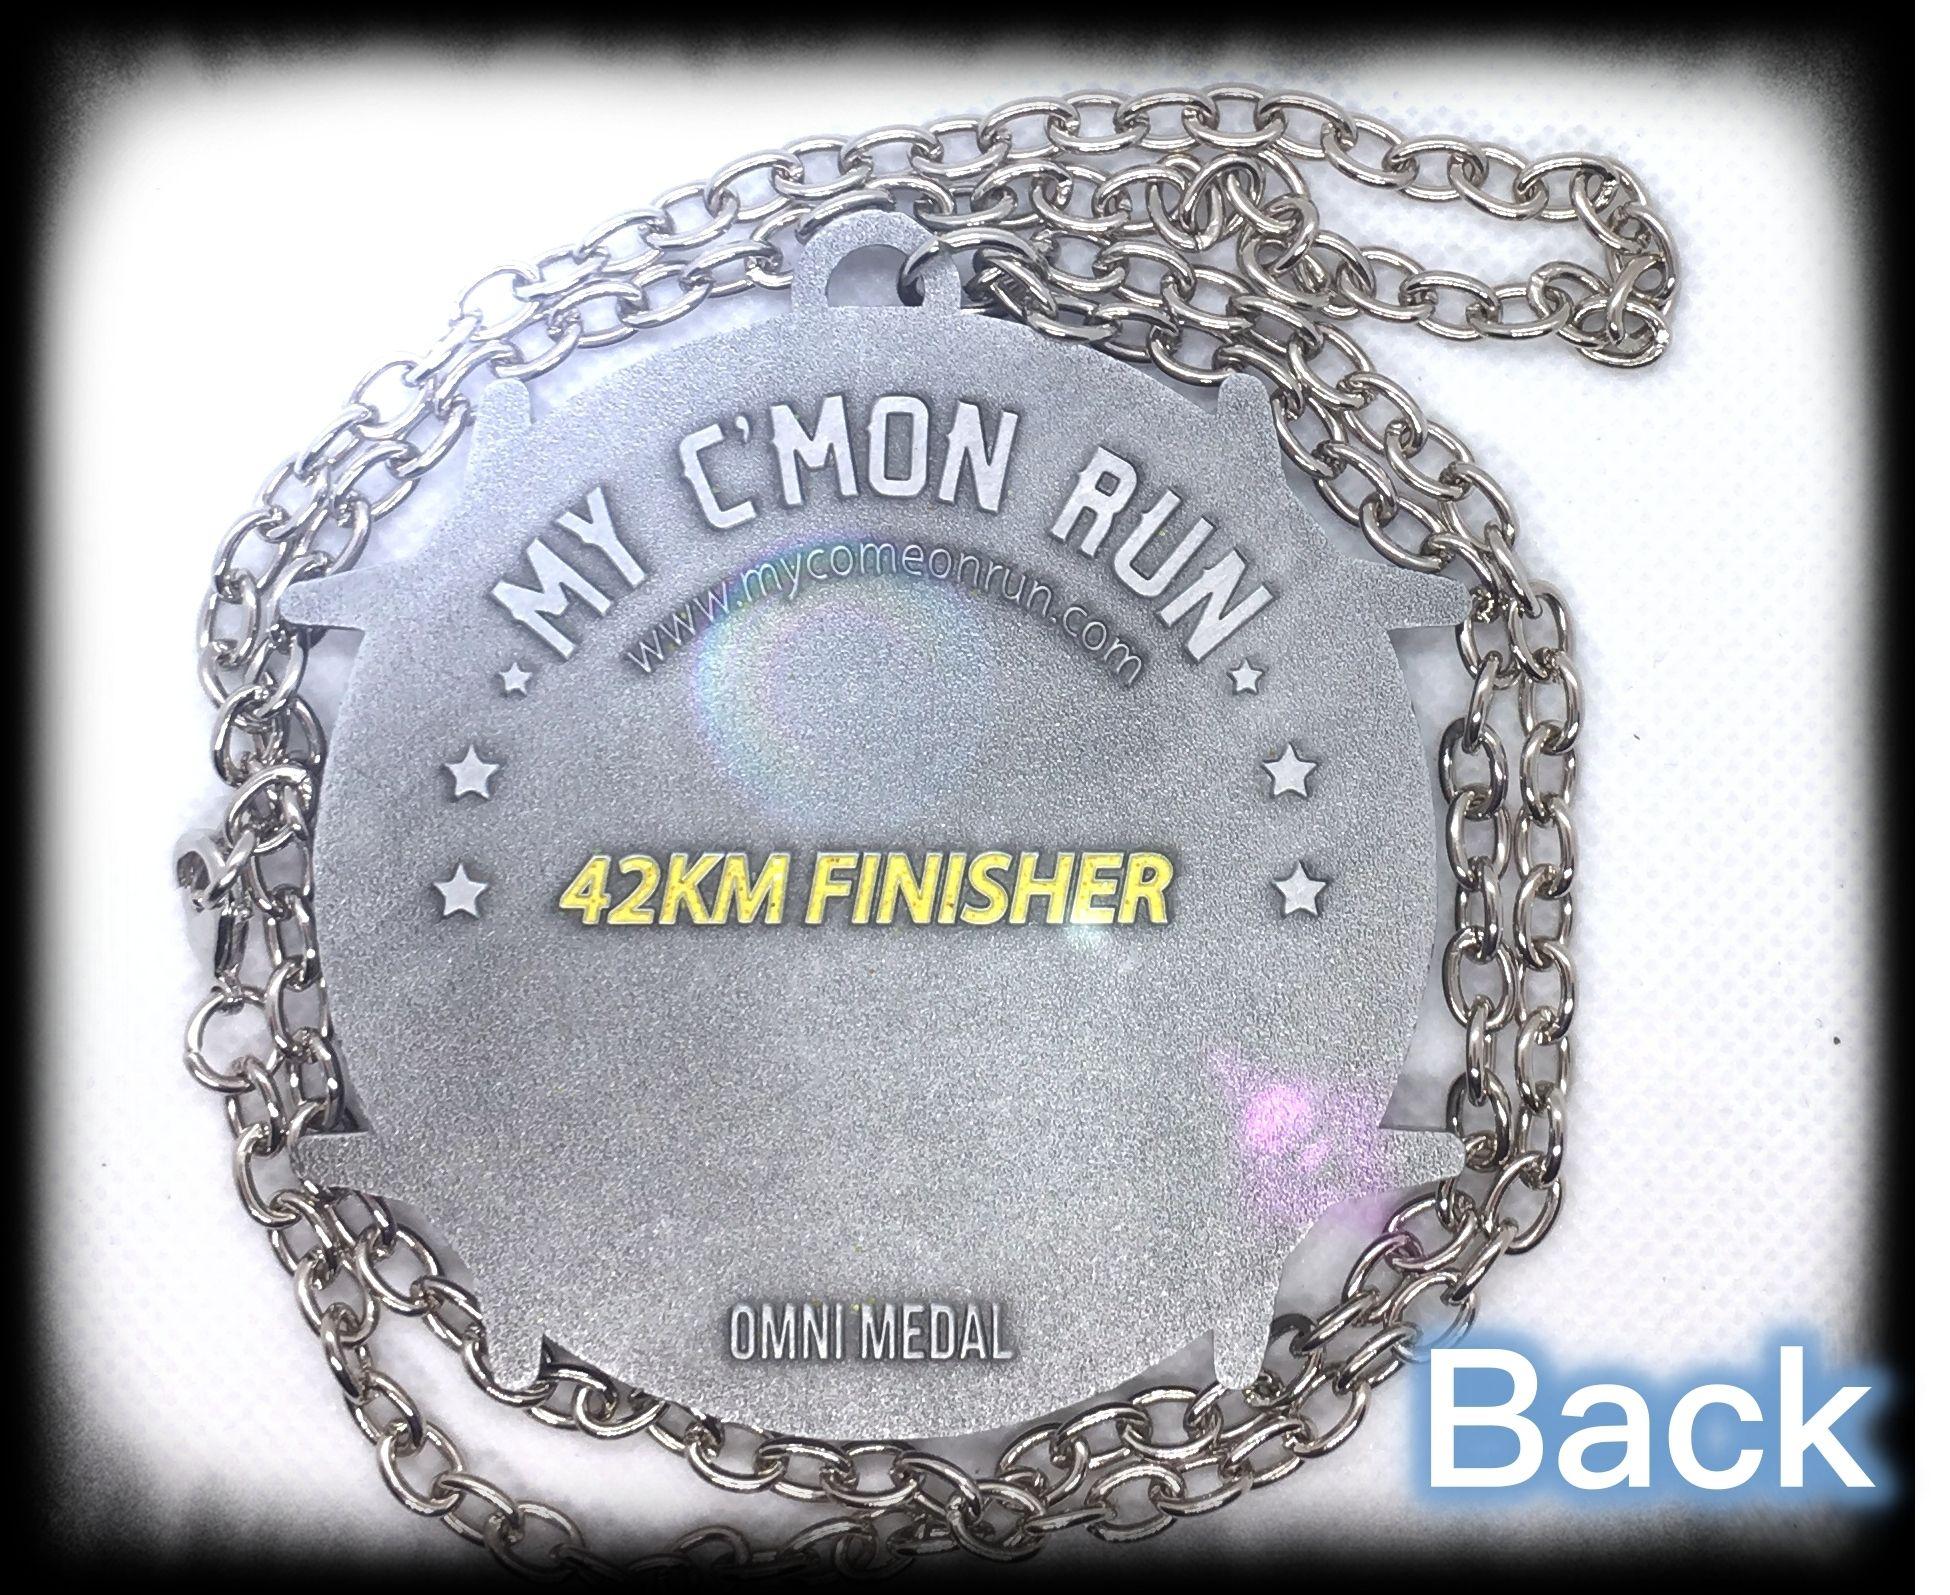 Boomerang 3D Logo - Past Event Medal Collection : Boomerang 3D Medal – My Come On Run